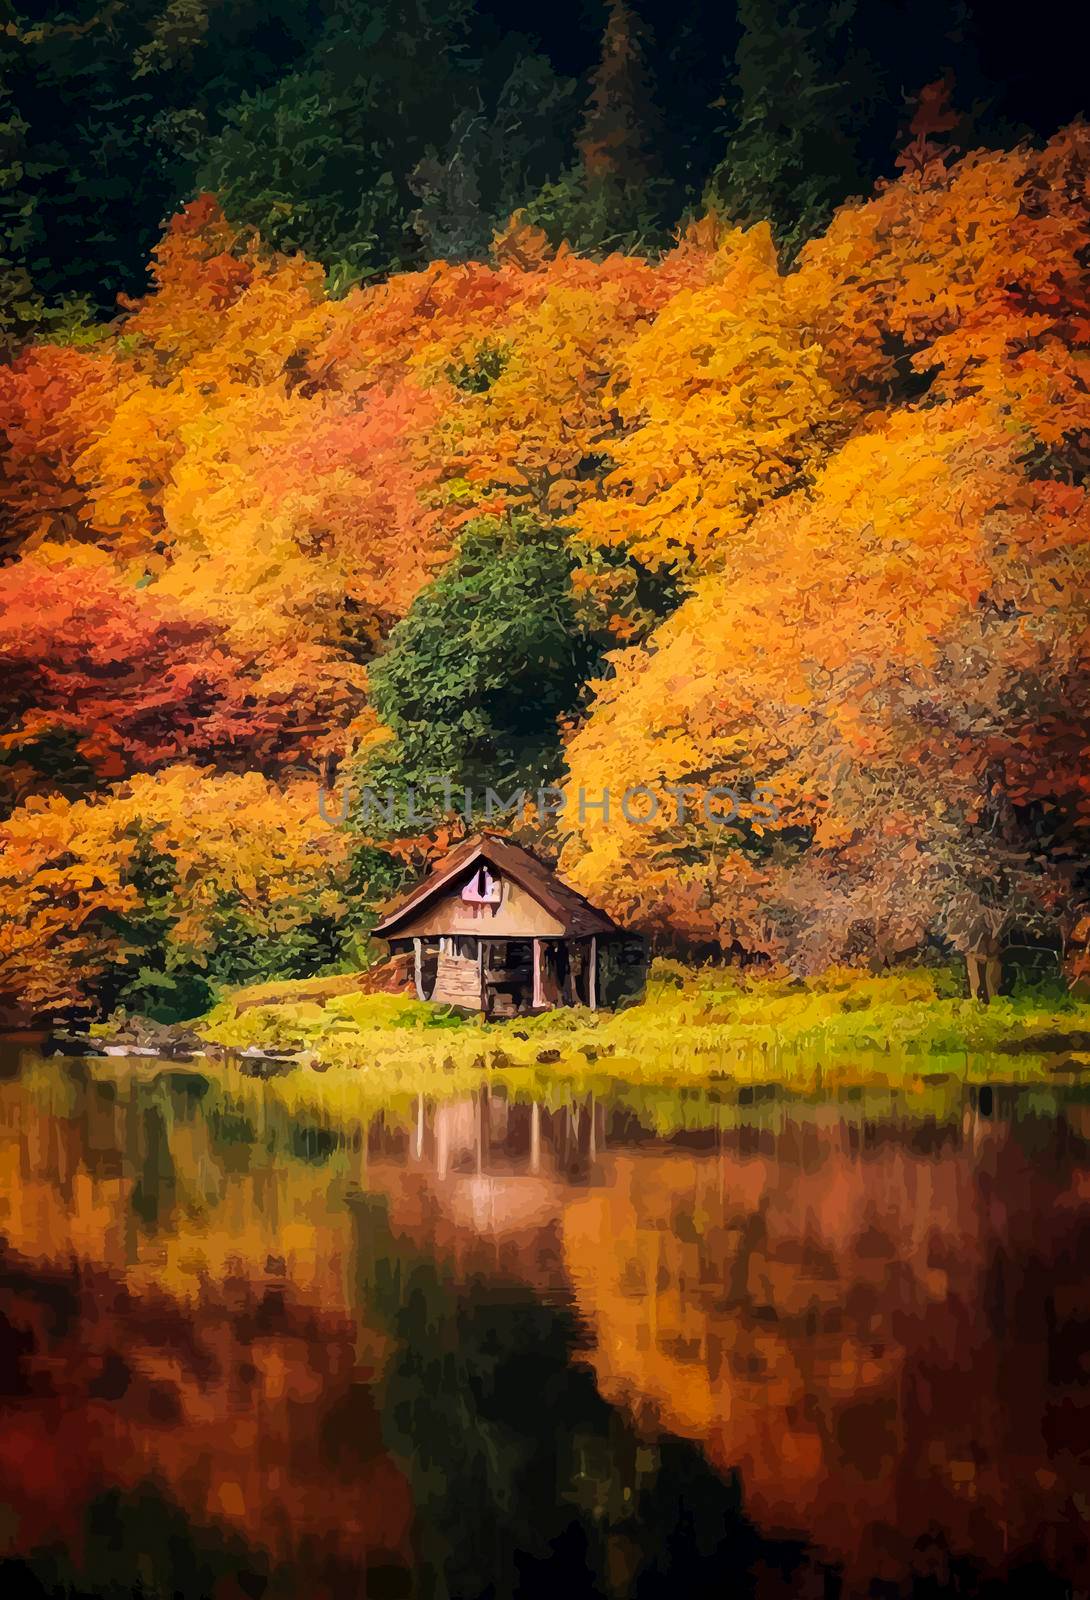 cabin in the woods by the lake, forest in autumn.